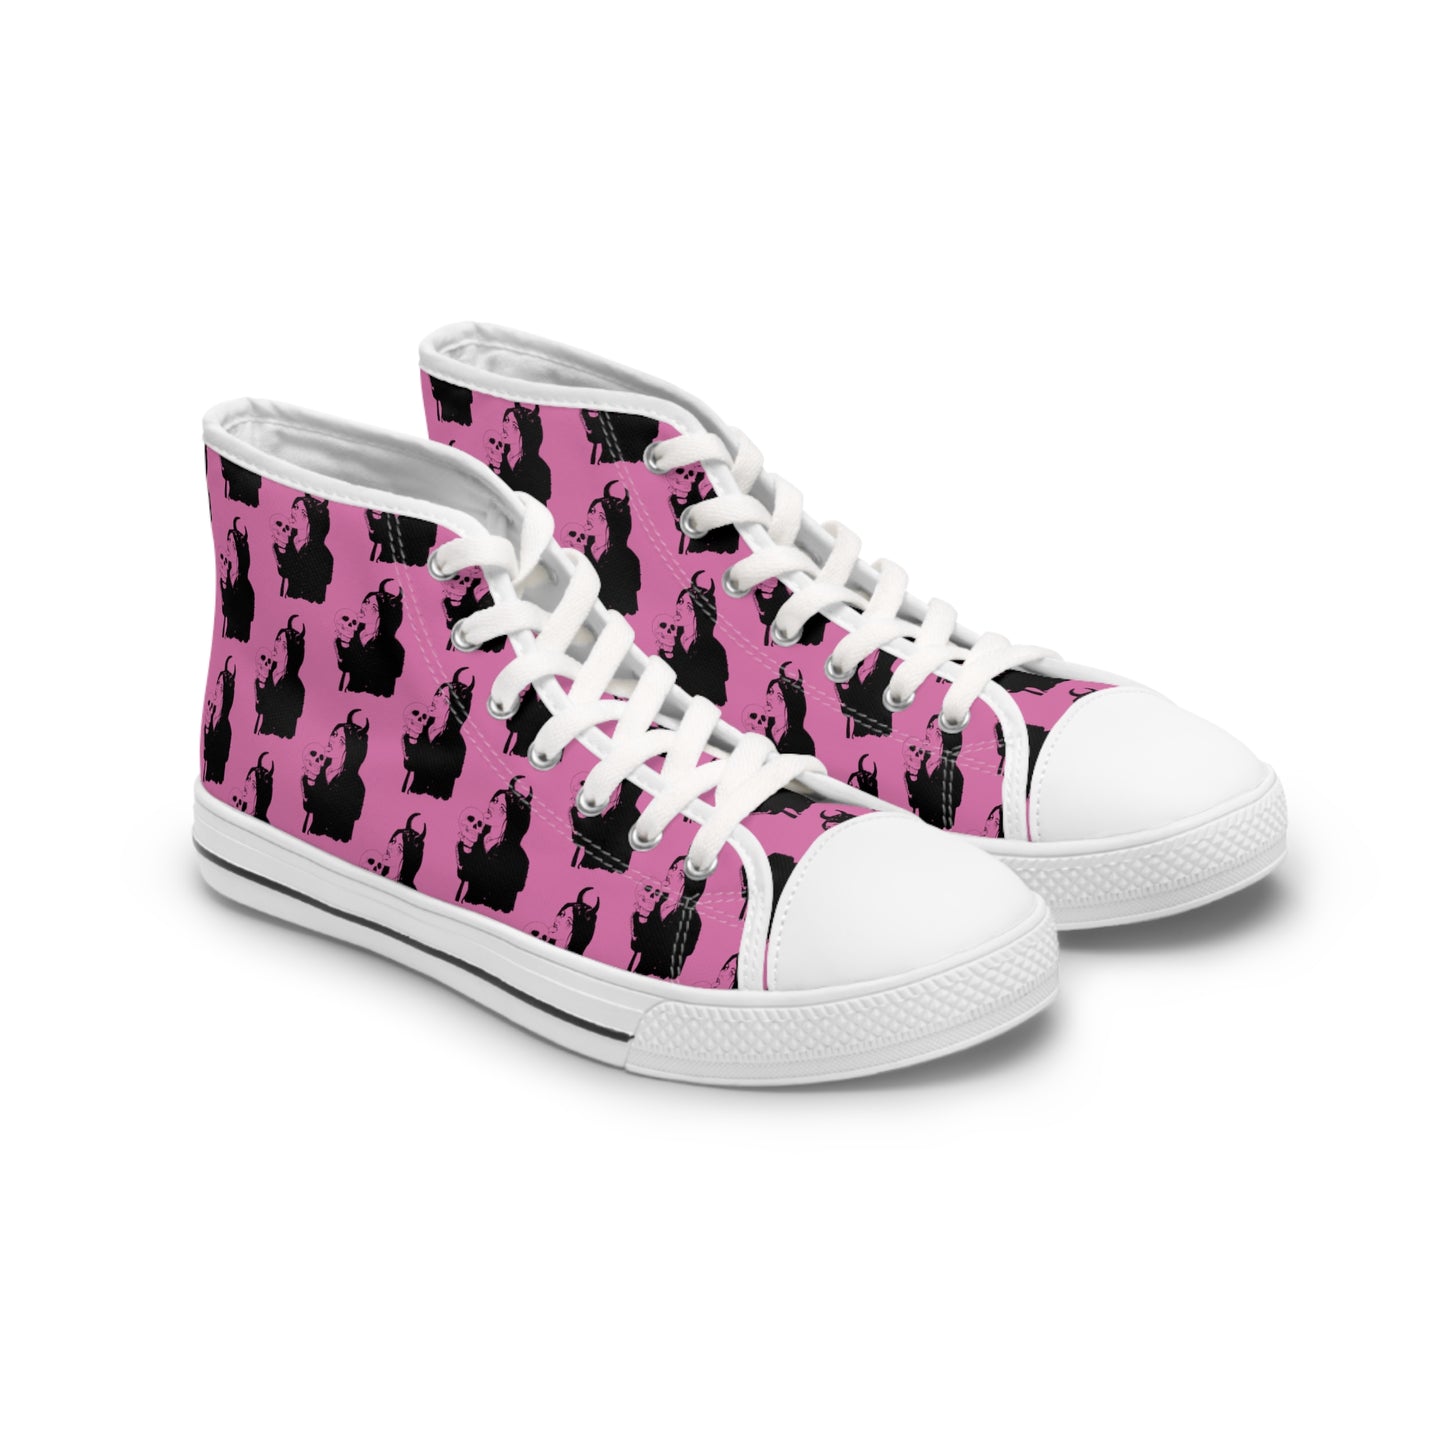 Pastel Goth Sneakers For Women With Skull Licking Gothic Woman Print and White Sole